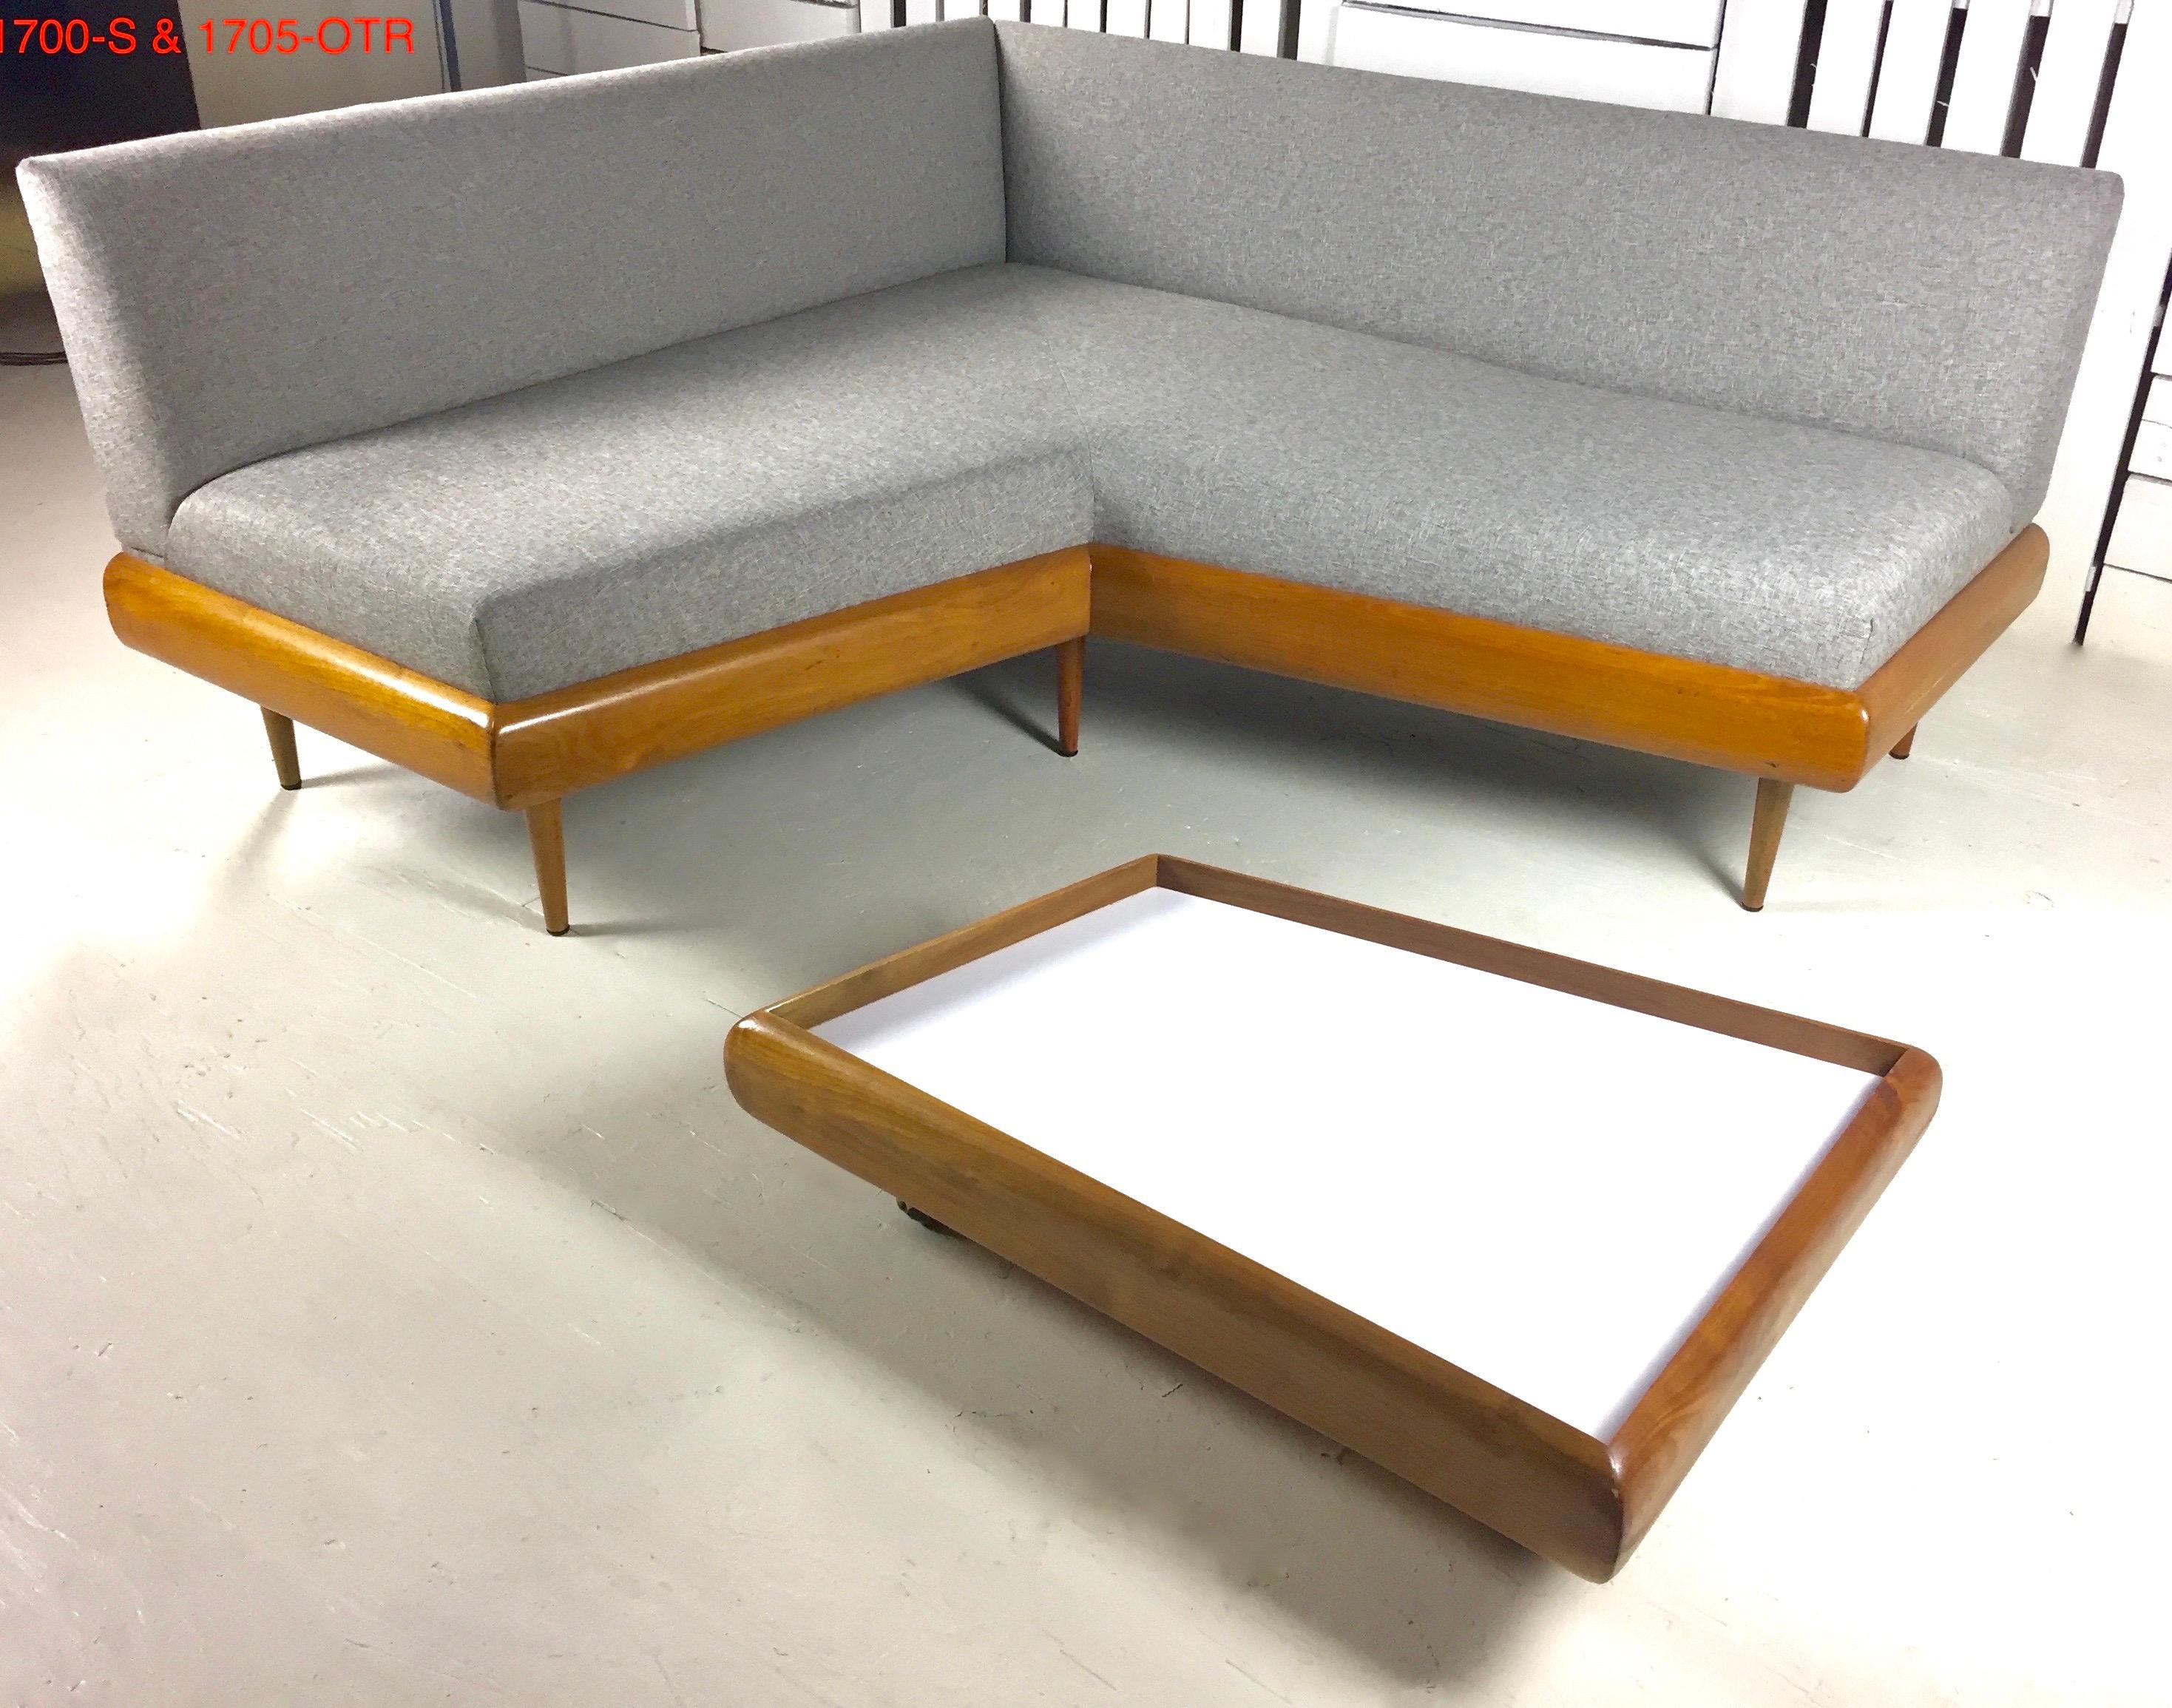 Authentic Adrian Pearsall pieces are some of his most dramatic creations. They also need space!

Magnificent and coveted signed Adrian Pearsall for Craft Associates squarish boomerang sofa with matching ottoman. The epitome of iconic Mid-Century